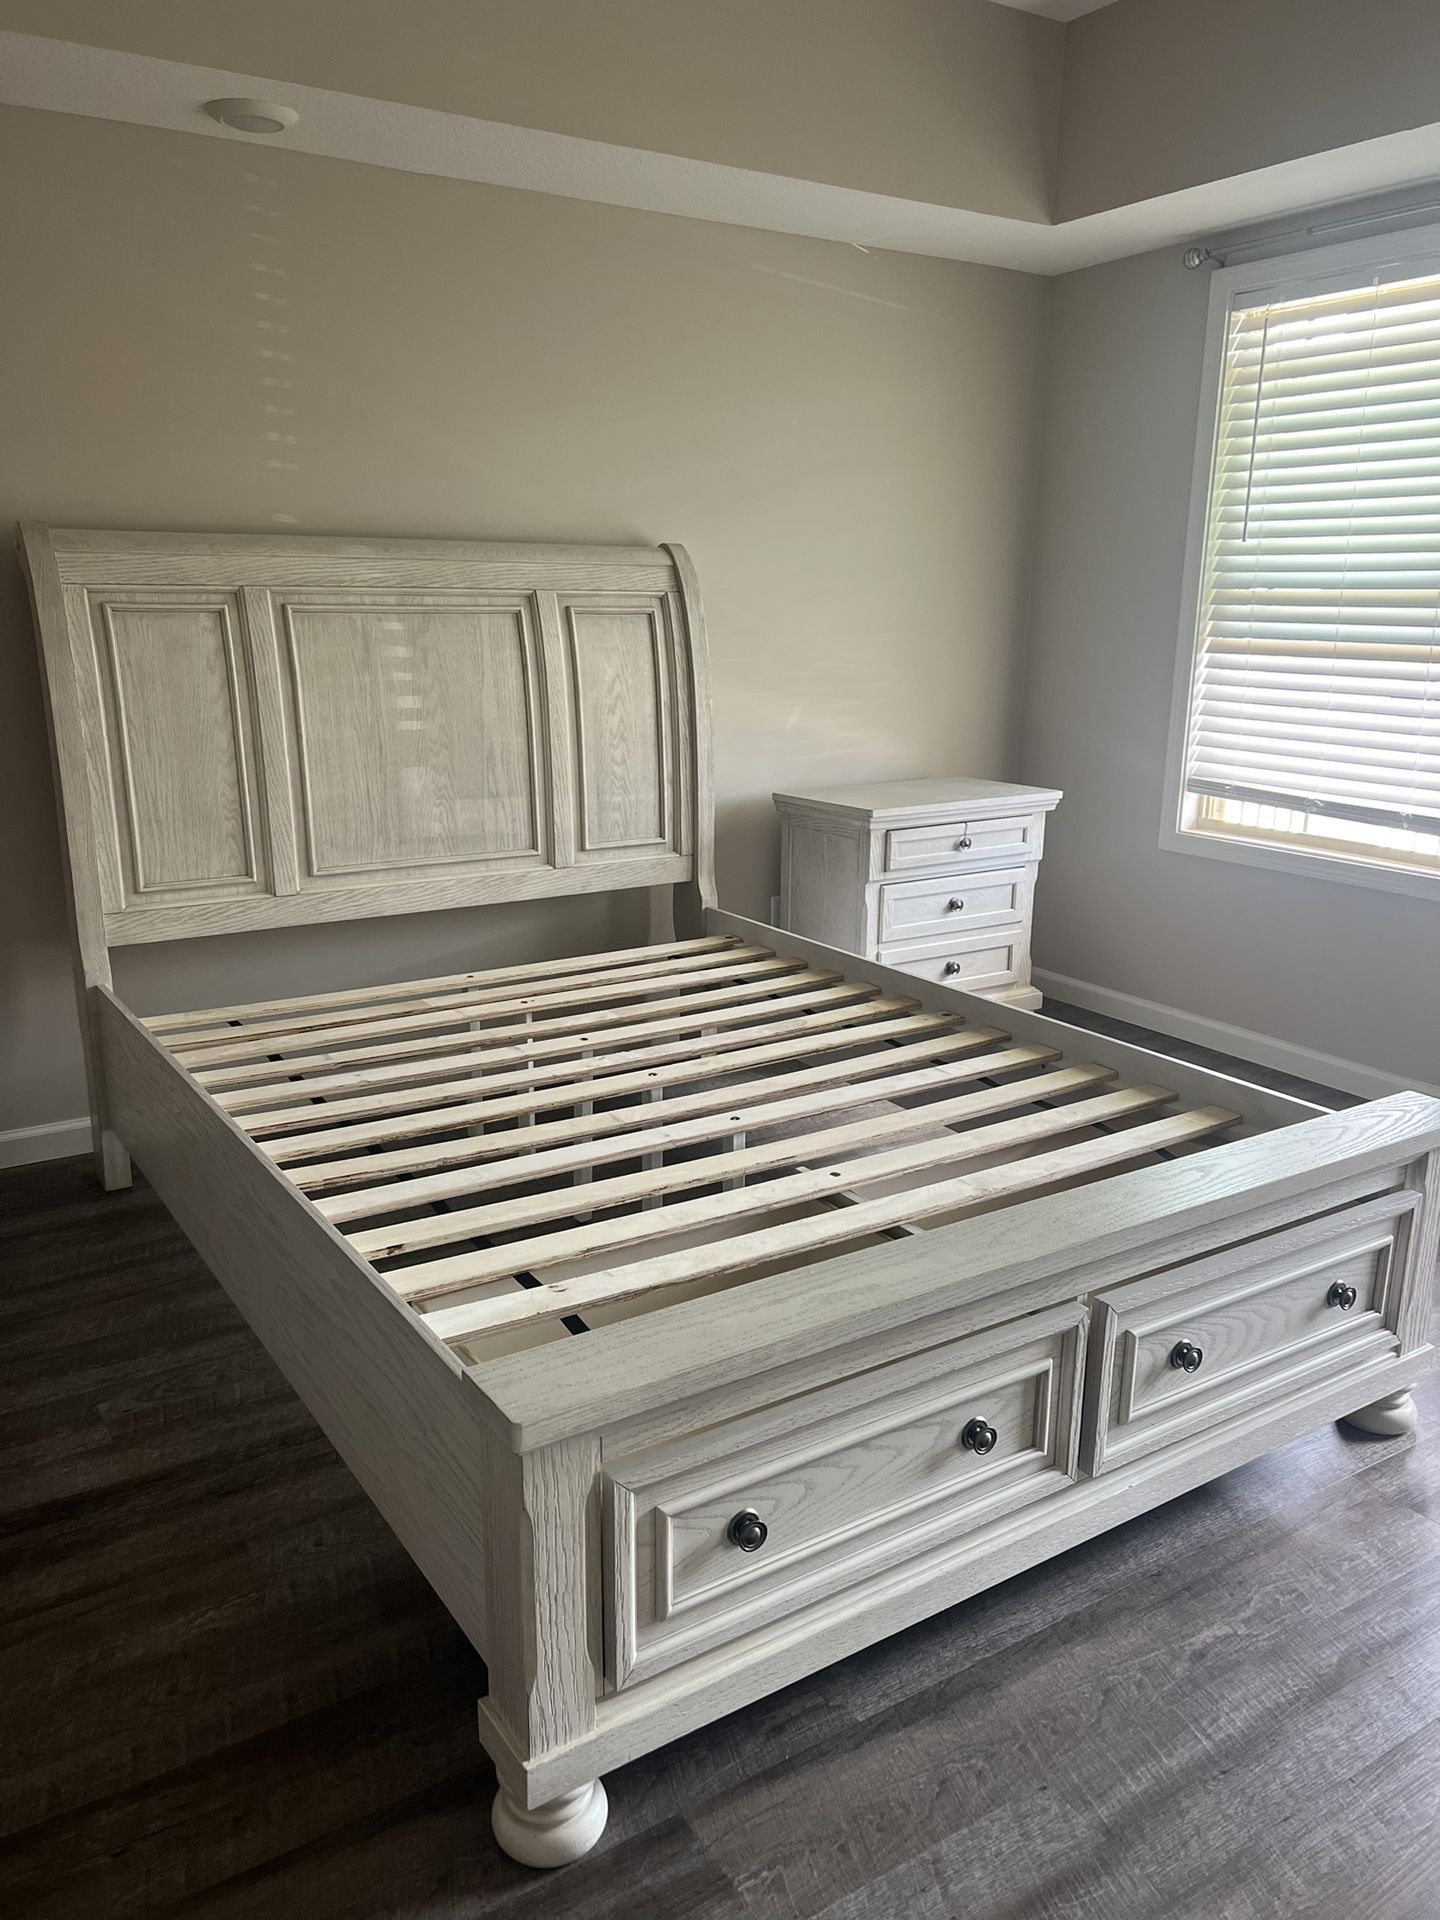 Cream Colored Wood Frame For Queen Sized Bed And Small Cream Colored Drawer 